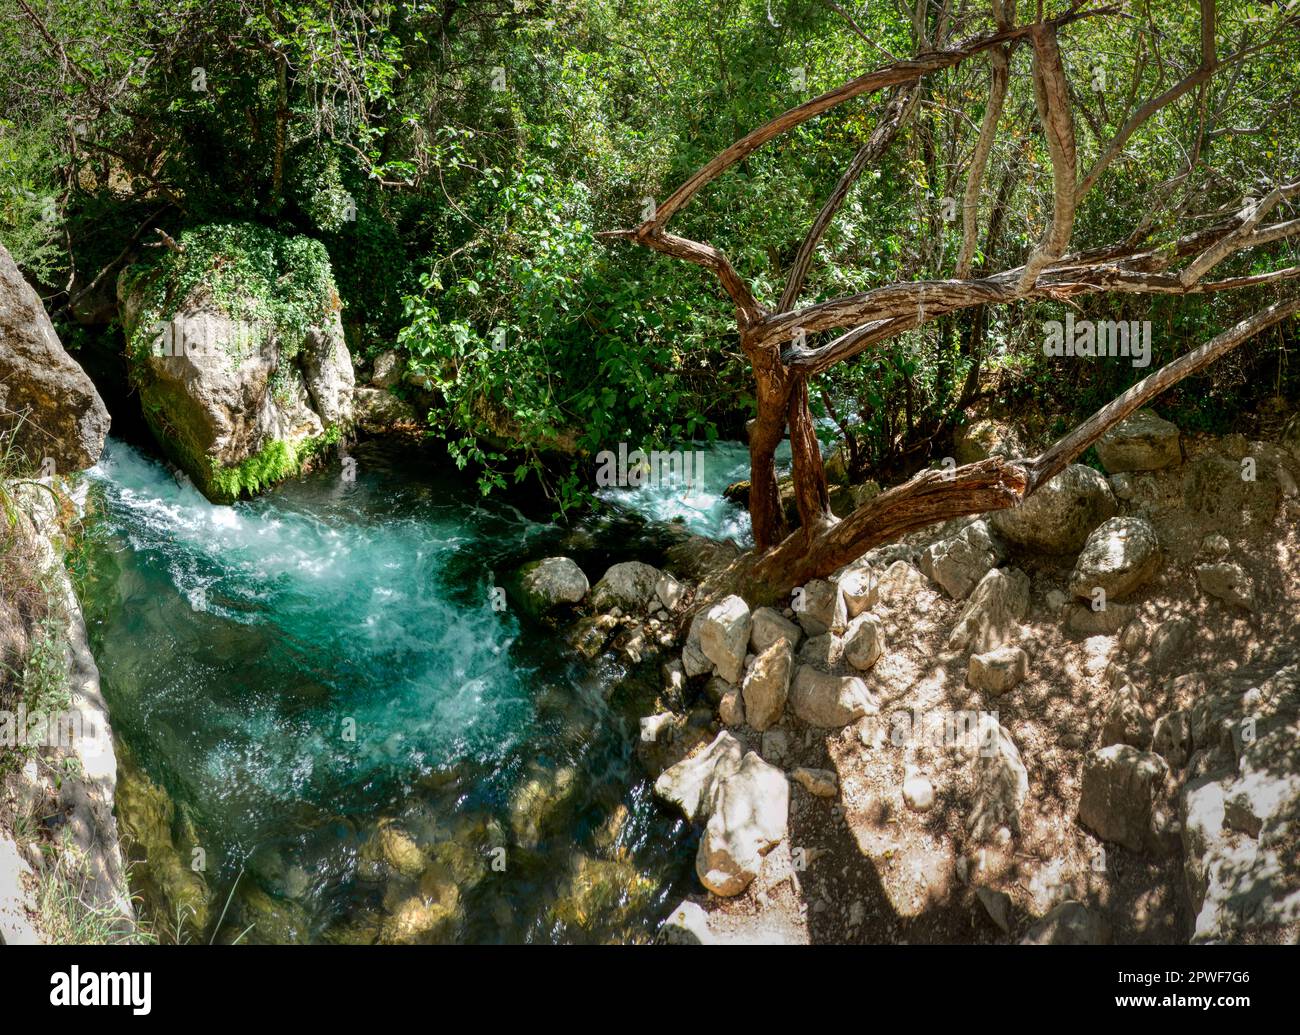 Bank of the Majaceite river, in the Sierra de Cadiz, on its route between the villages of Benaocaz and El Bosque. Andalusia, Spain Stock Photo